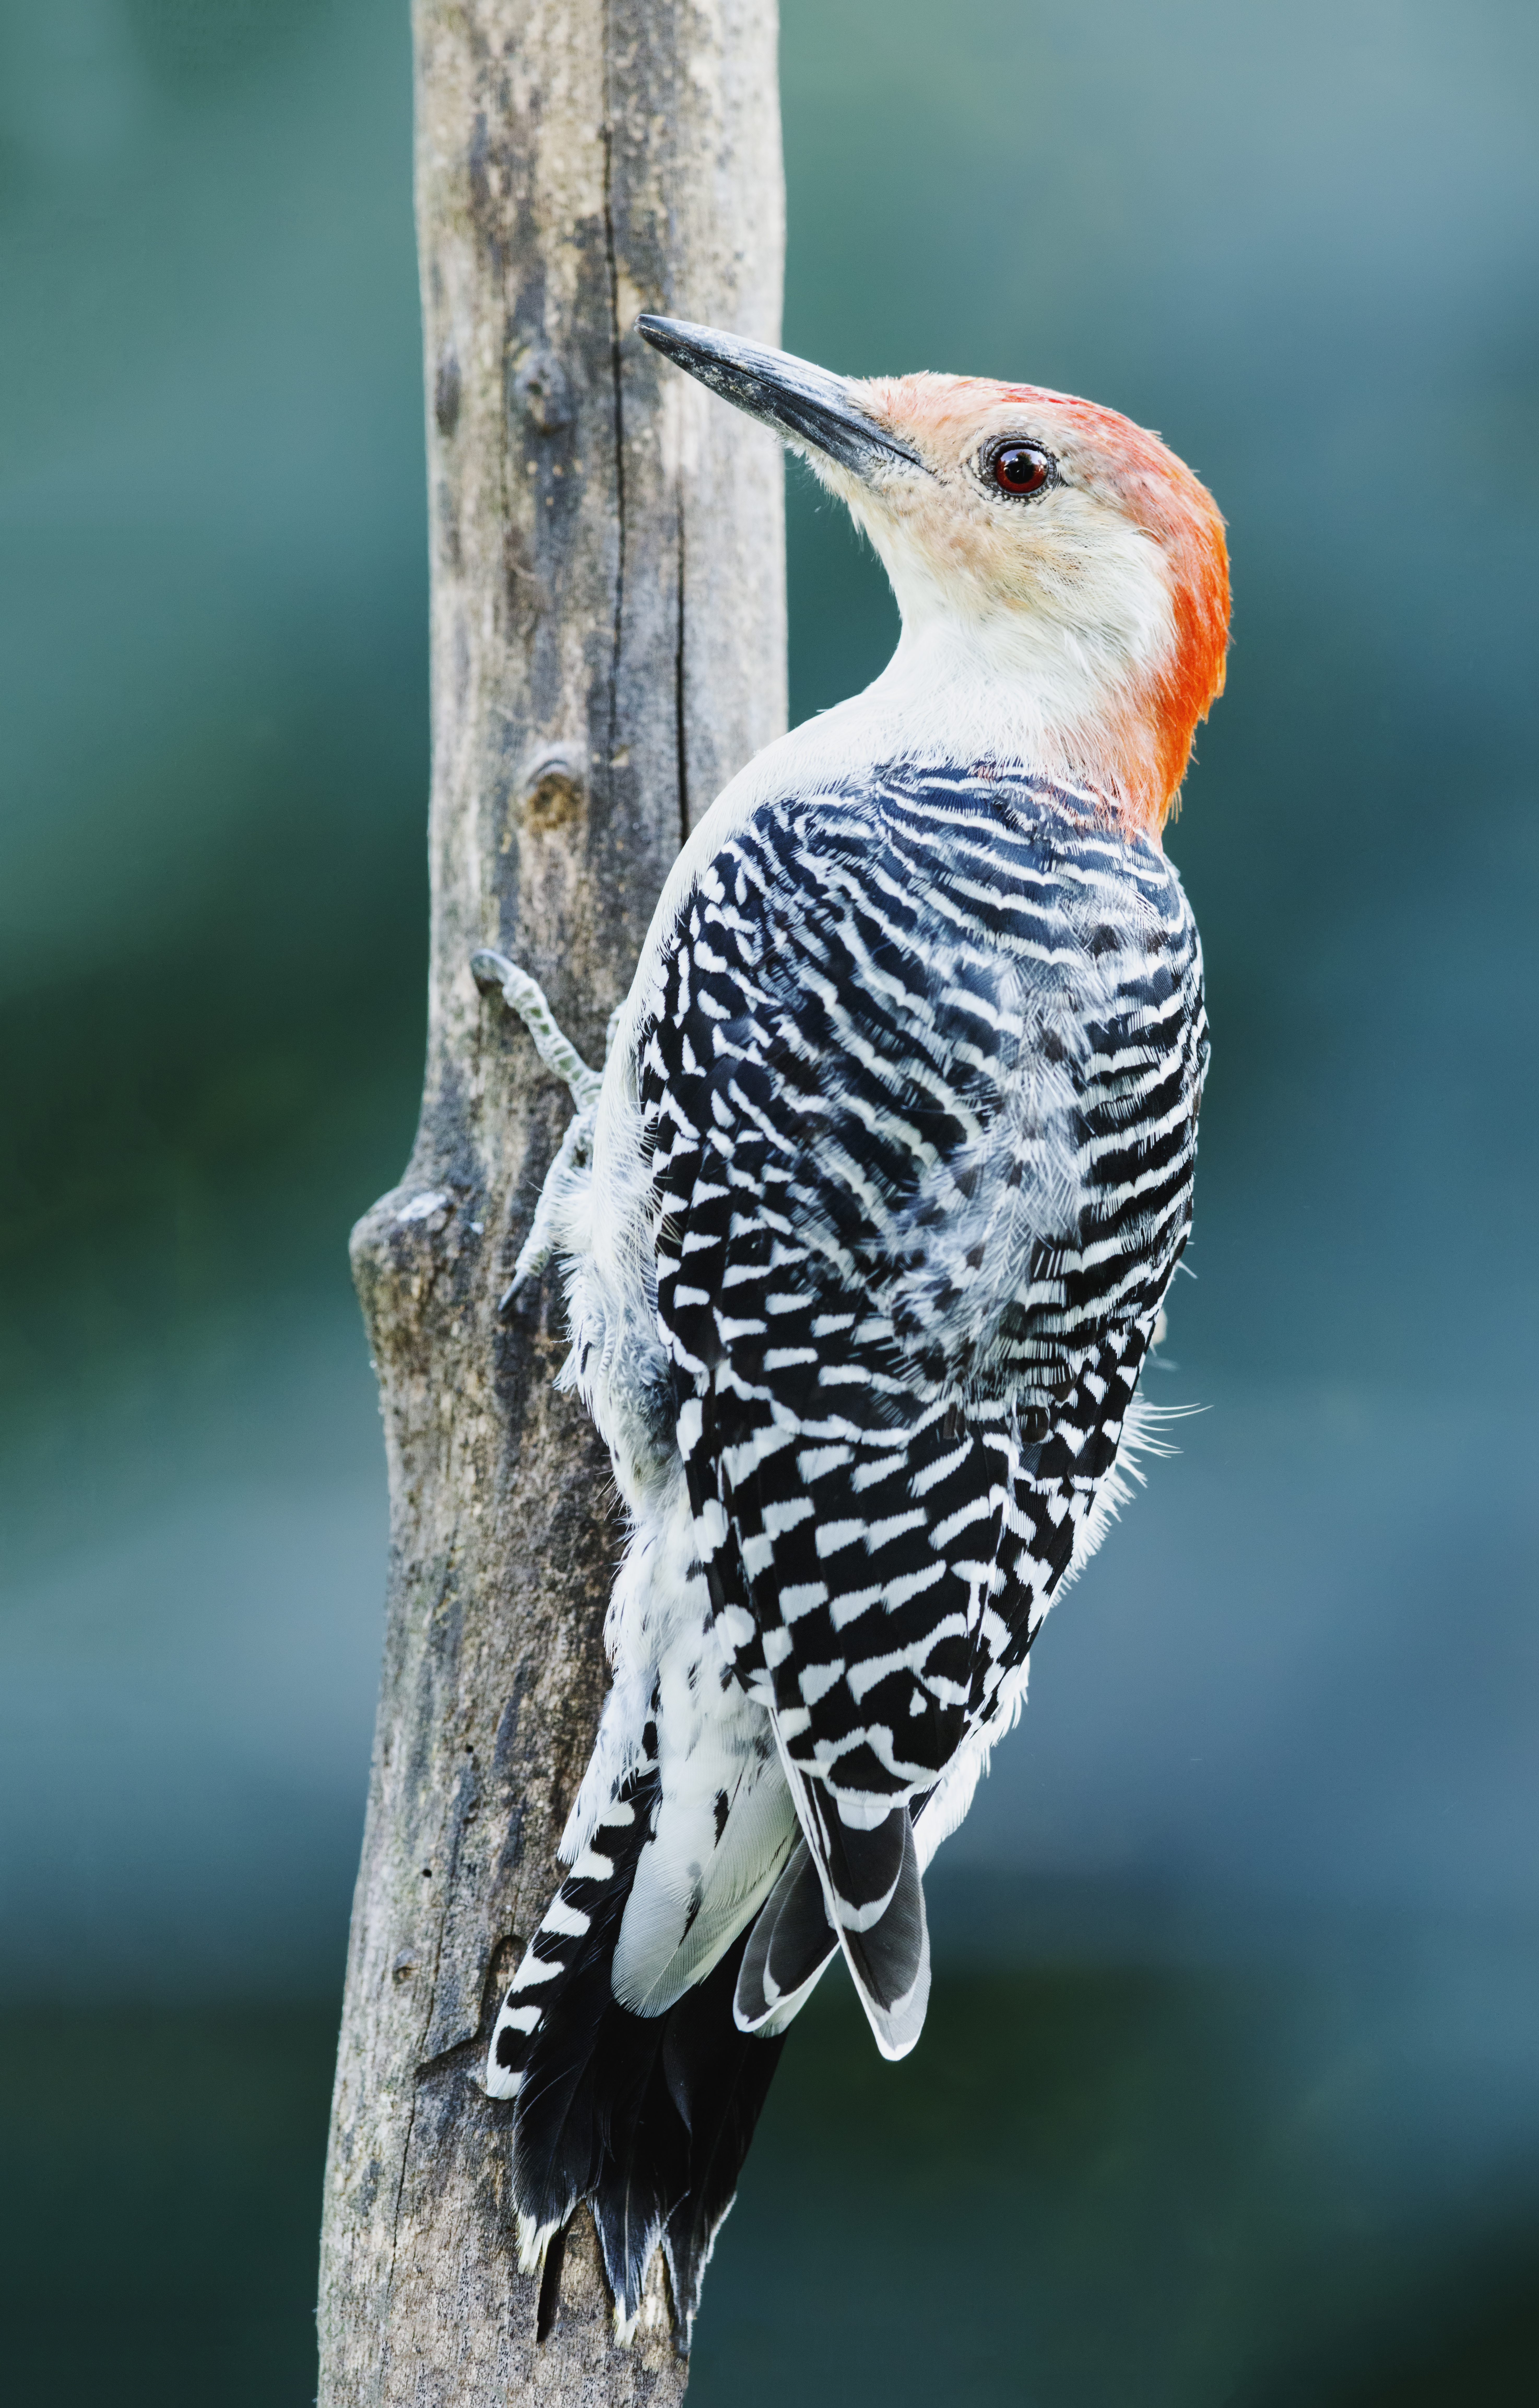 A close up shot of a Red-Bellied Woodpecker with a blurry teal background.